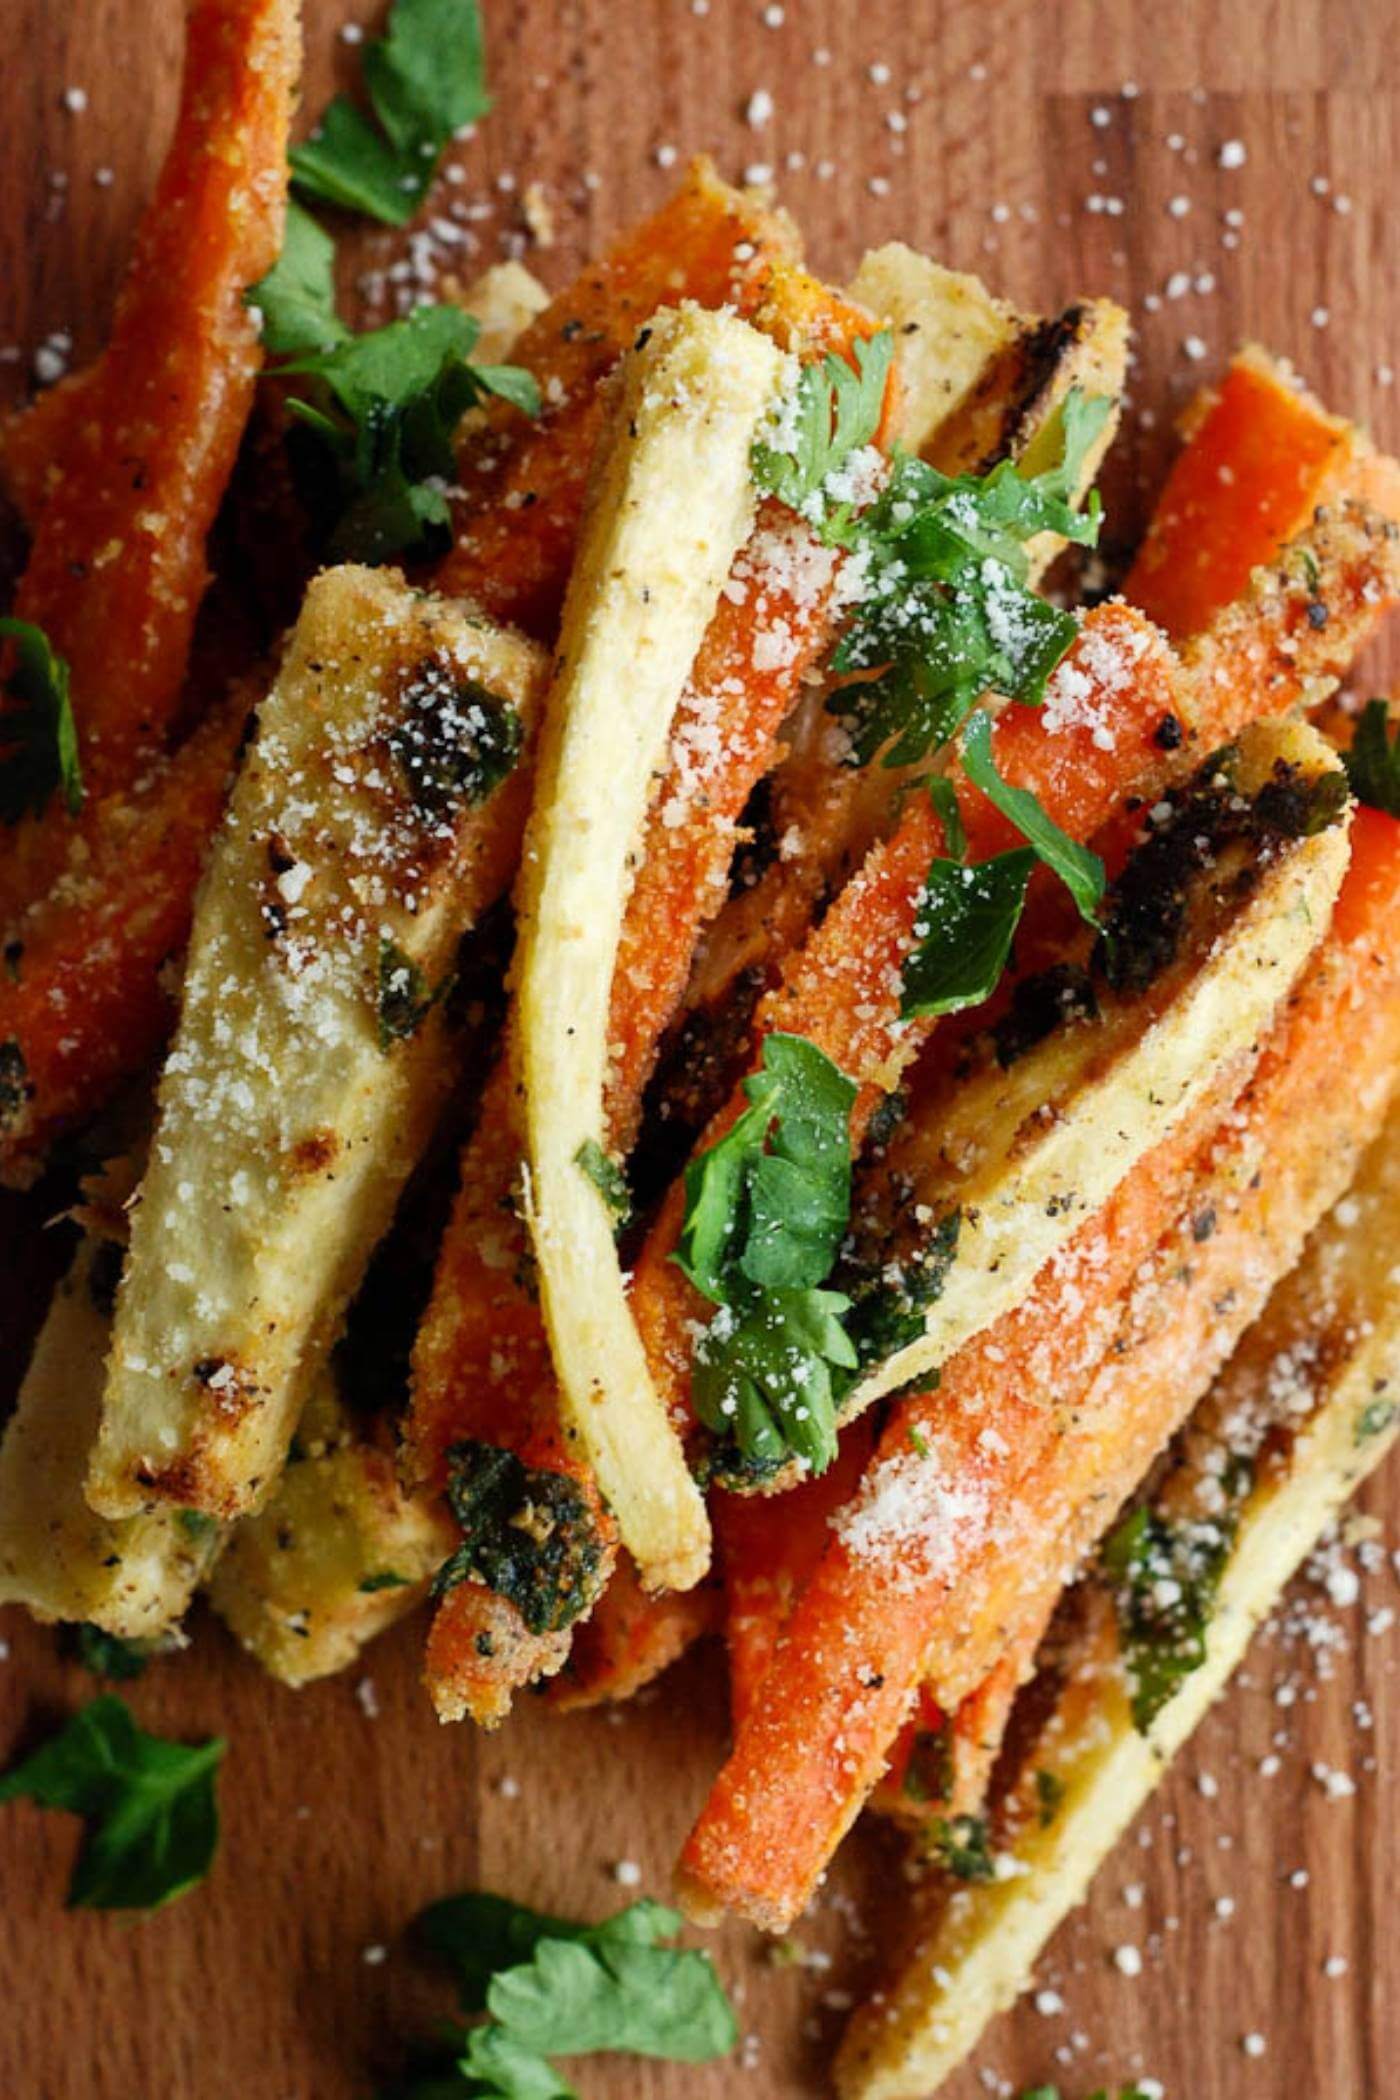 baked parmesan carrot and parsnip fries.